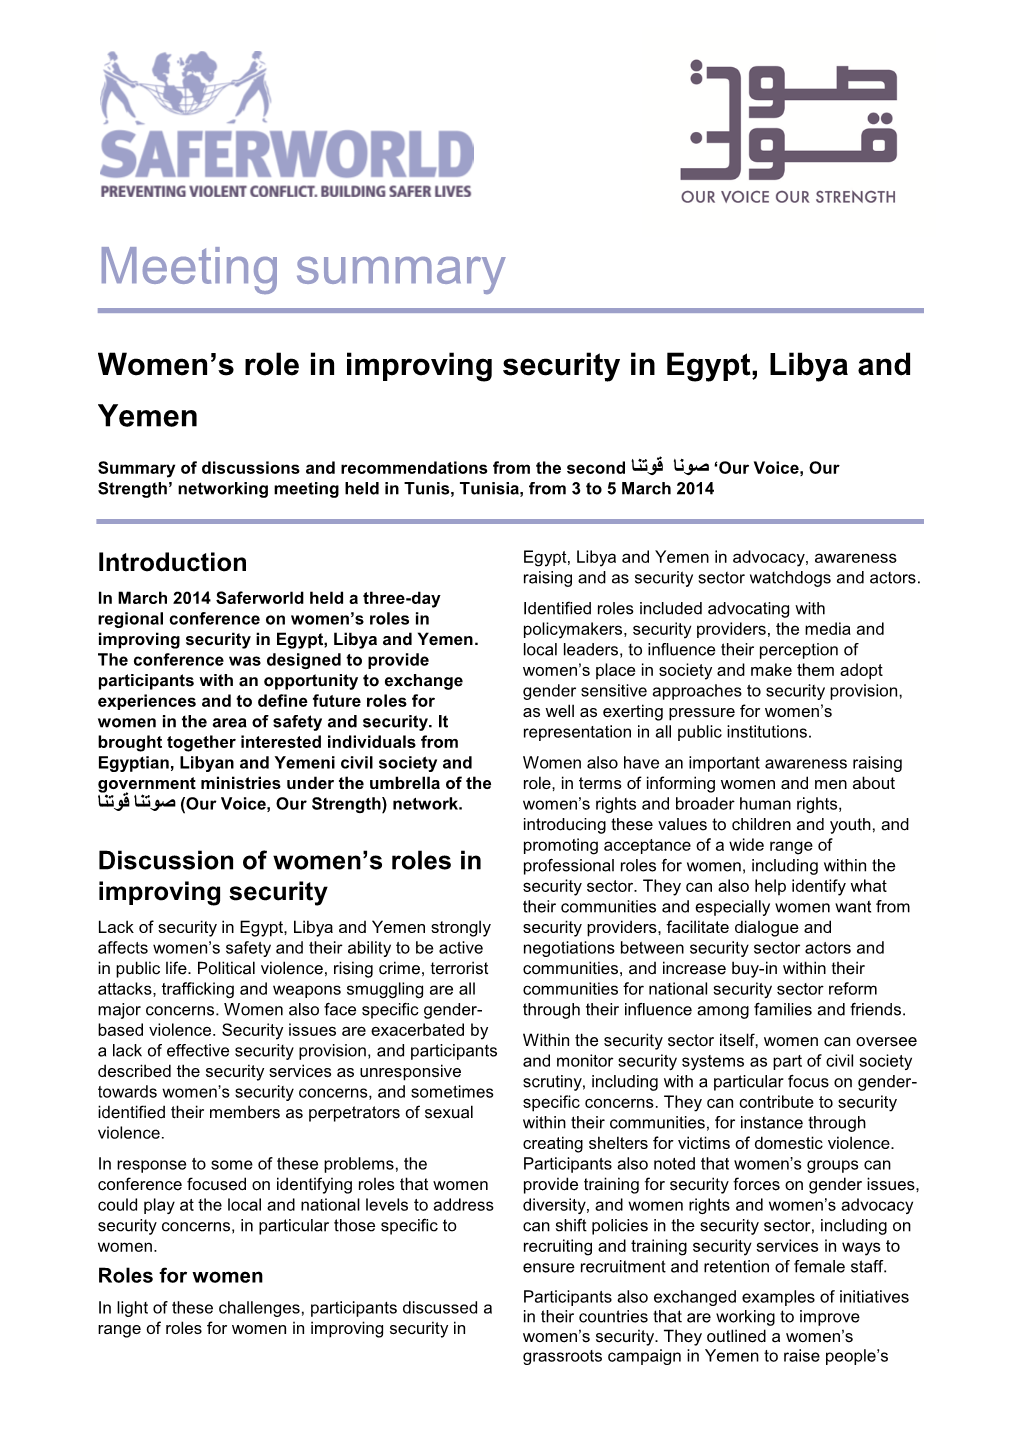 Women's Role in Improving Security in Egypt, Libya and Yemen